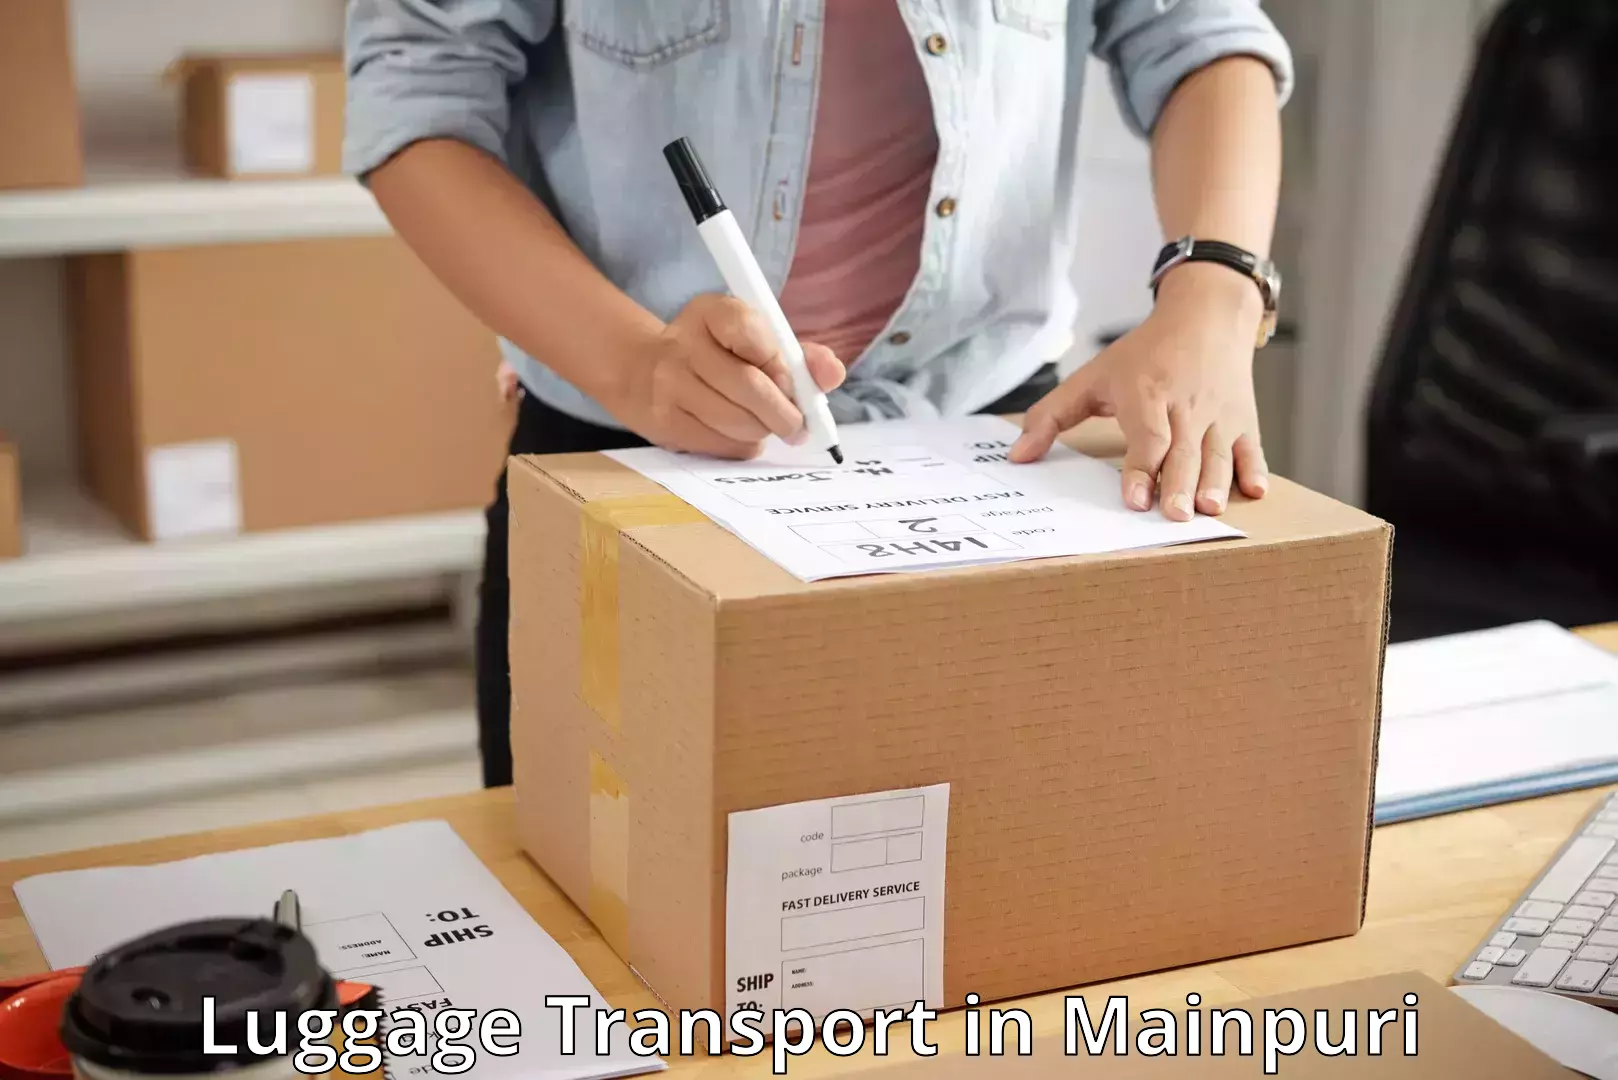 Luggage delivery estimate in Mainpuri